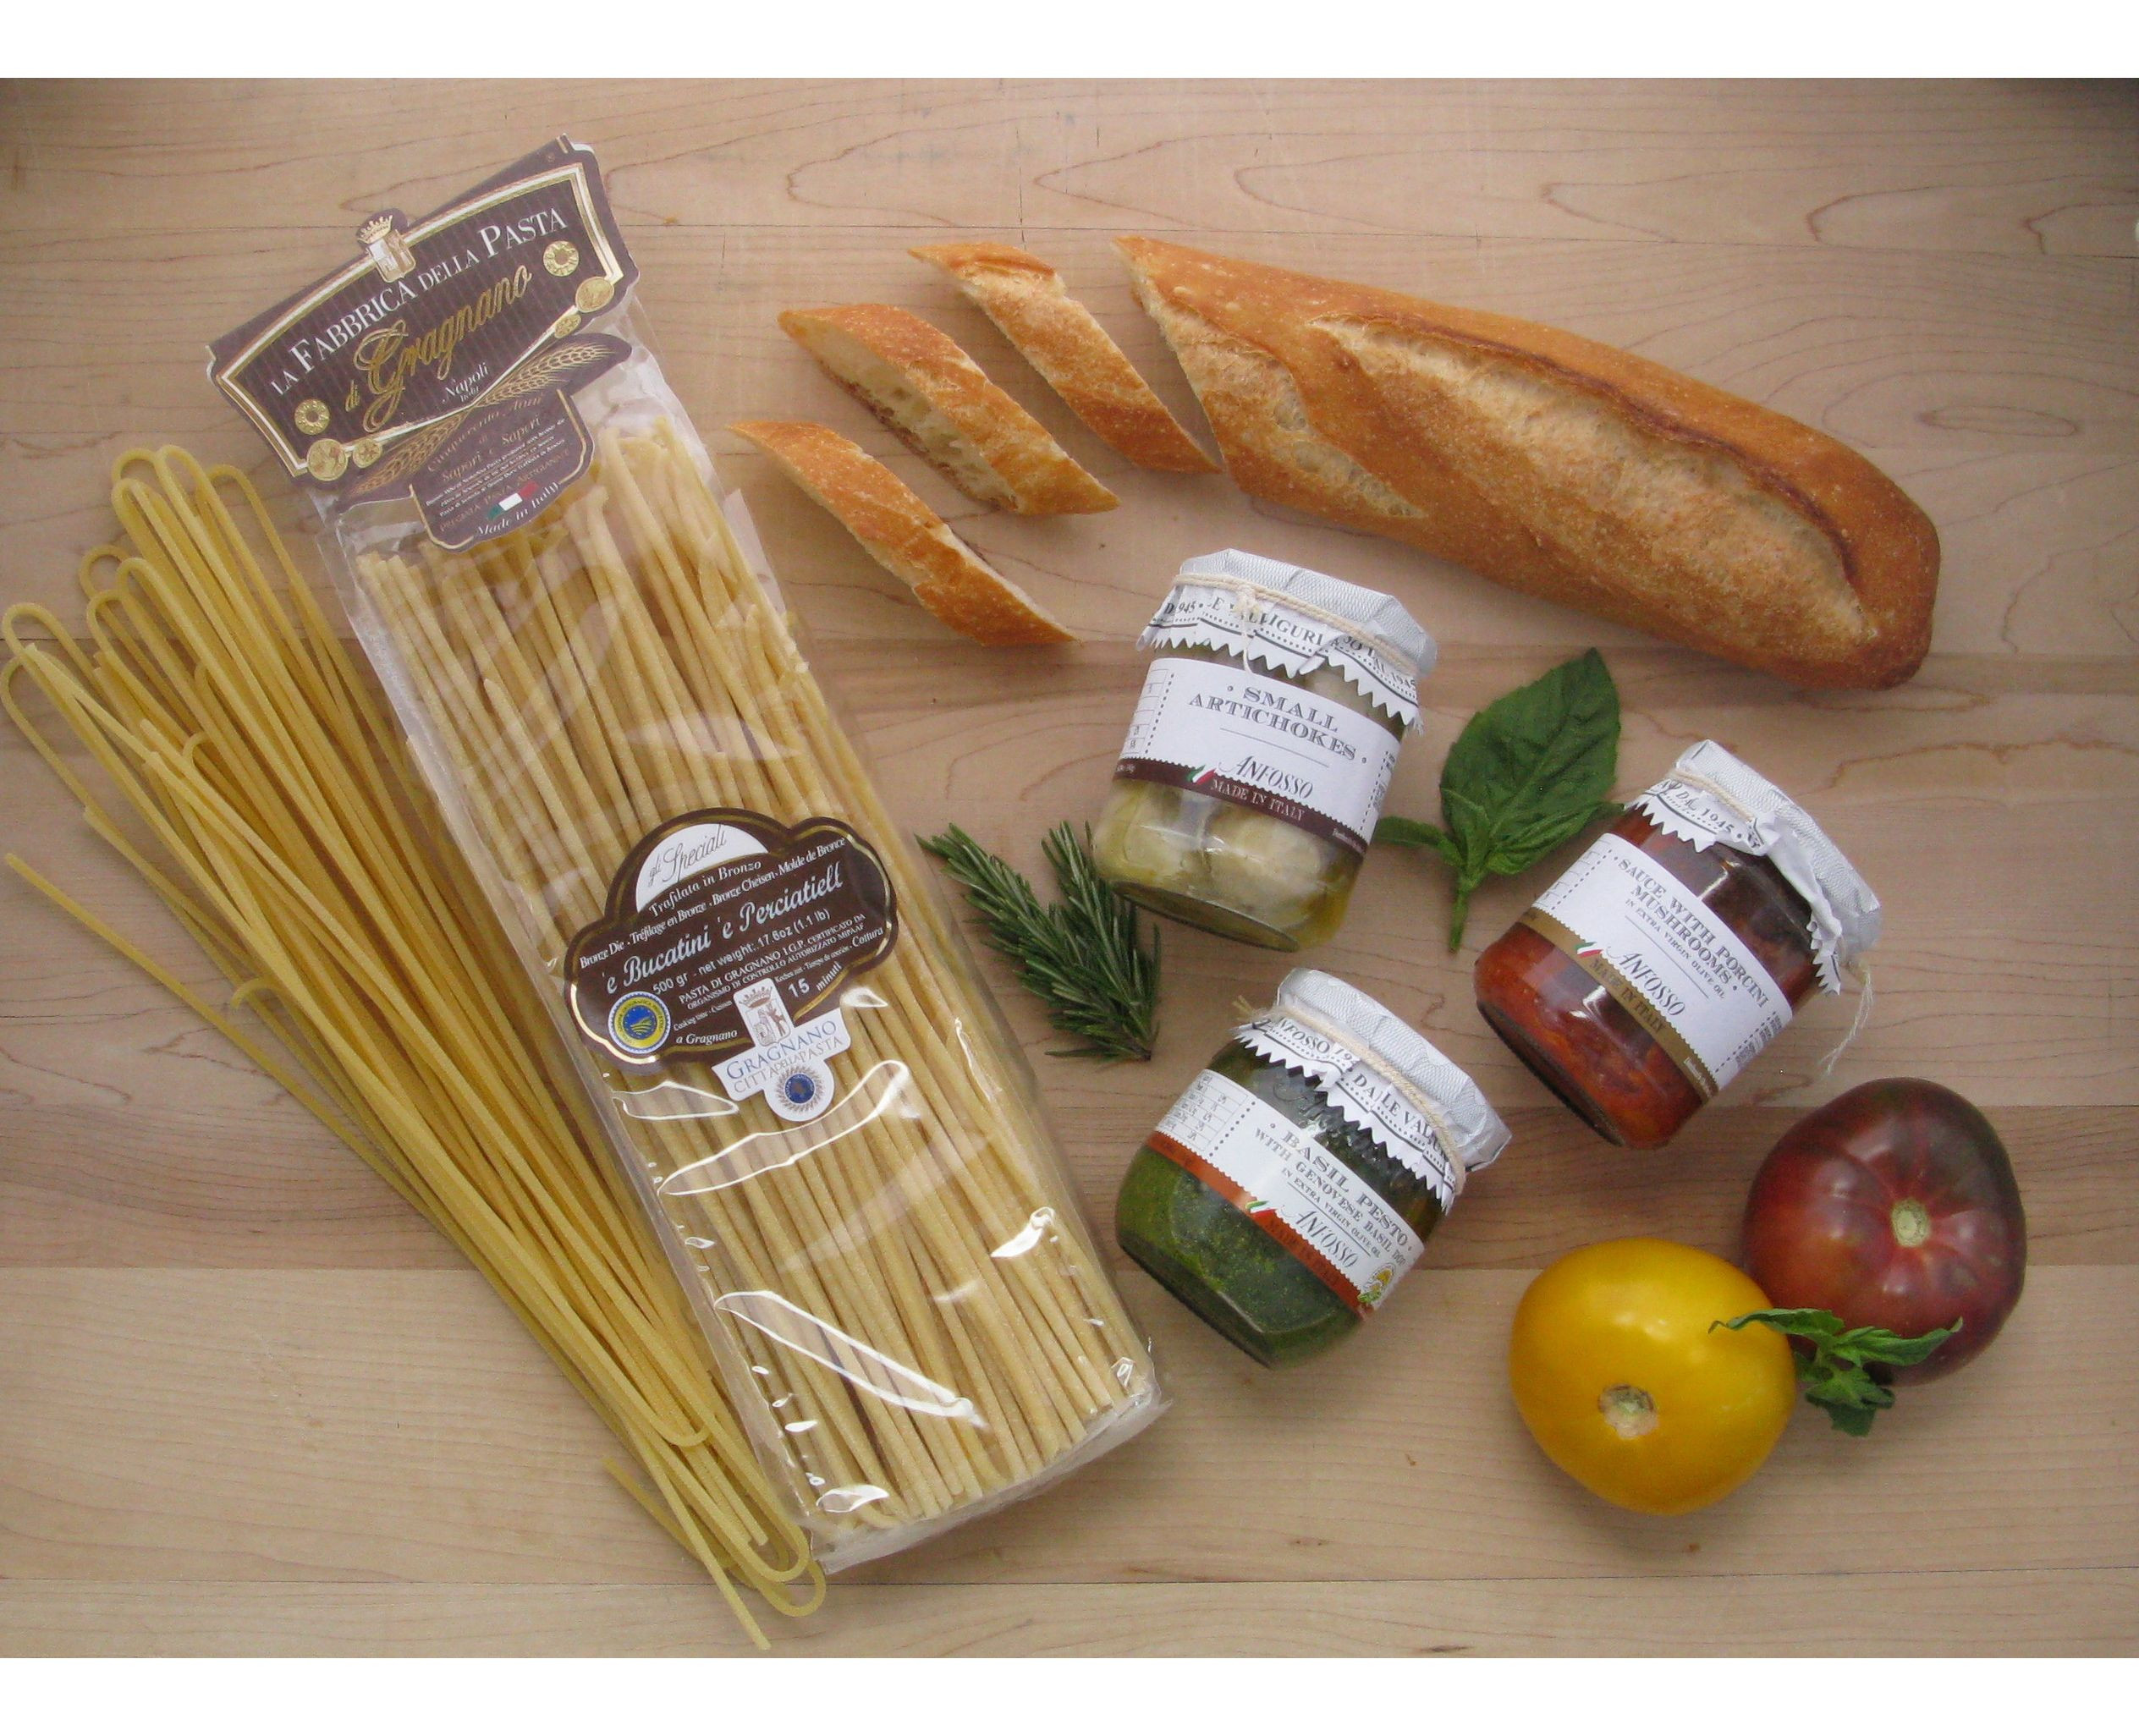 Food Gift Basket Ideas
 Gourmet Food Baskets Mouthwatering Gift Ideas